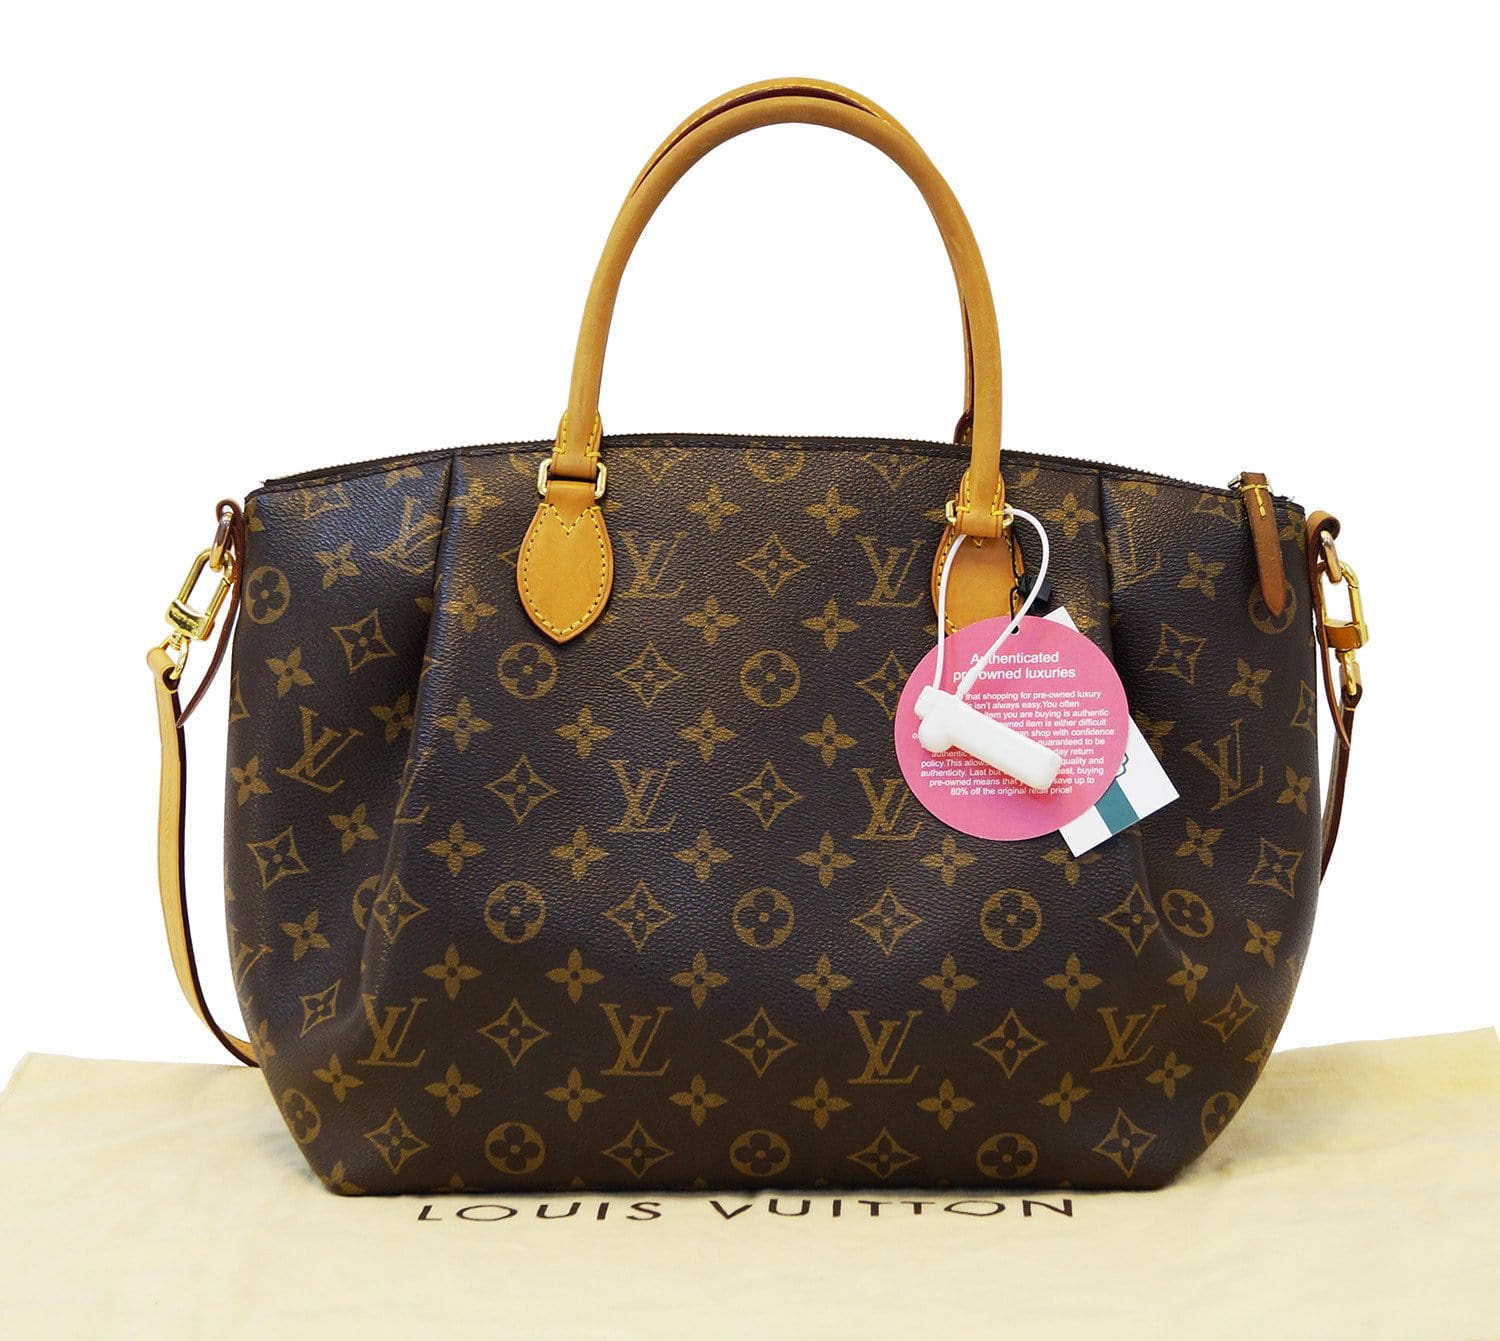 How To Tell If You're Buying Real Louis Vuitton Bags - The Lux Portal